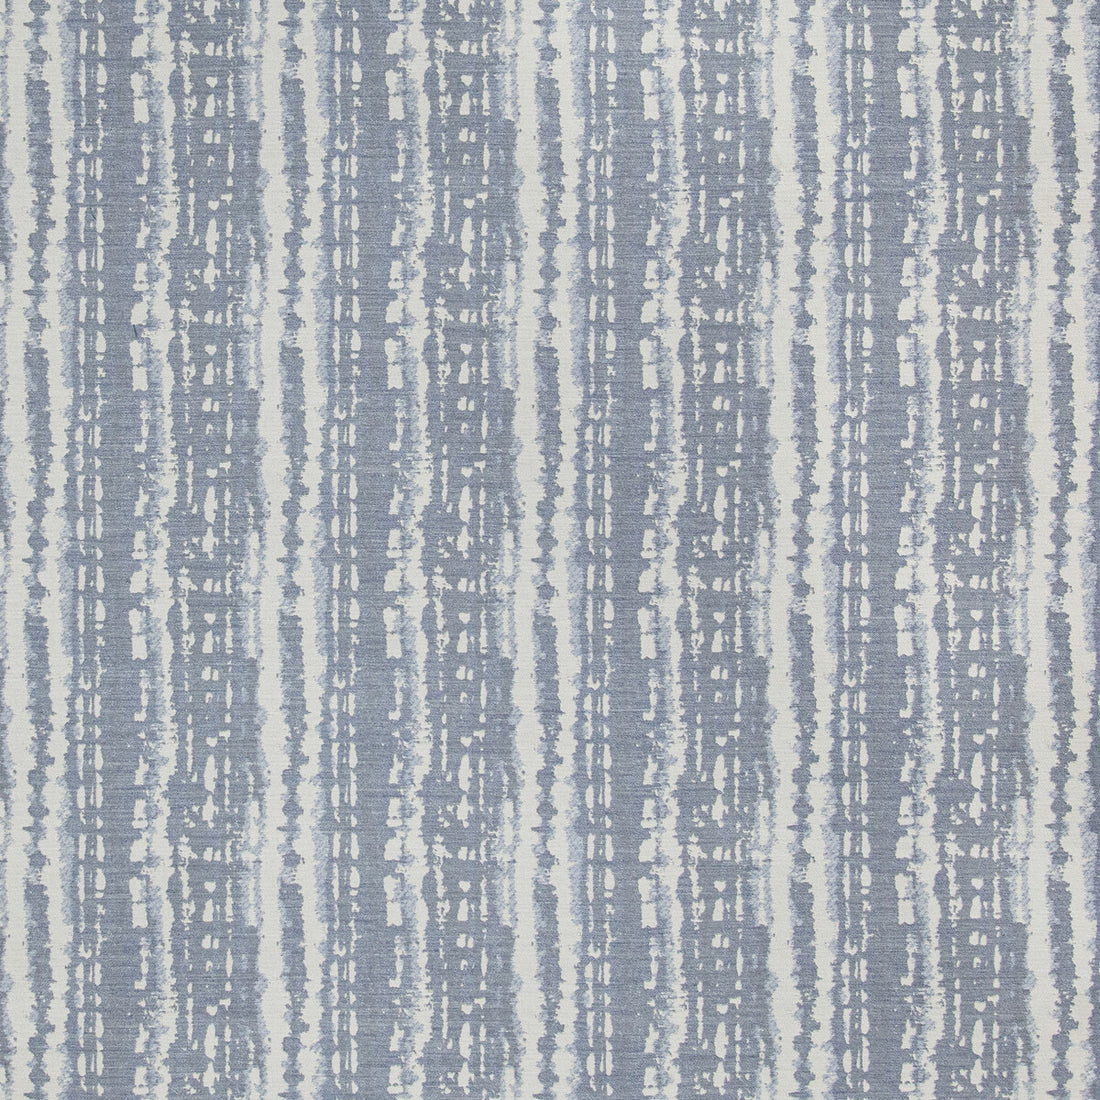 Leilani fabric in chambray color - pattern 35826.15.0 - by Kravet Design in the Indoor / Outdoor collection